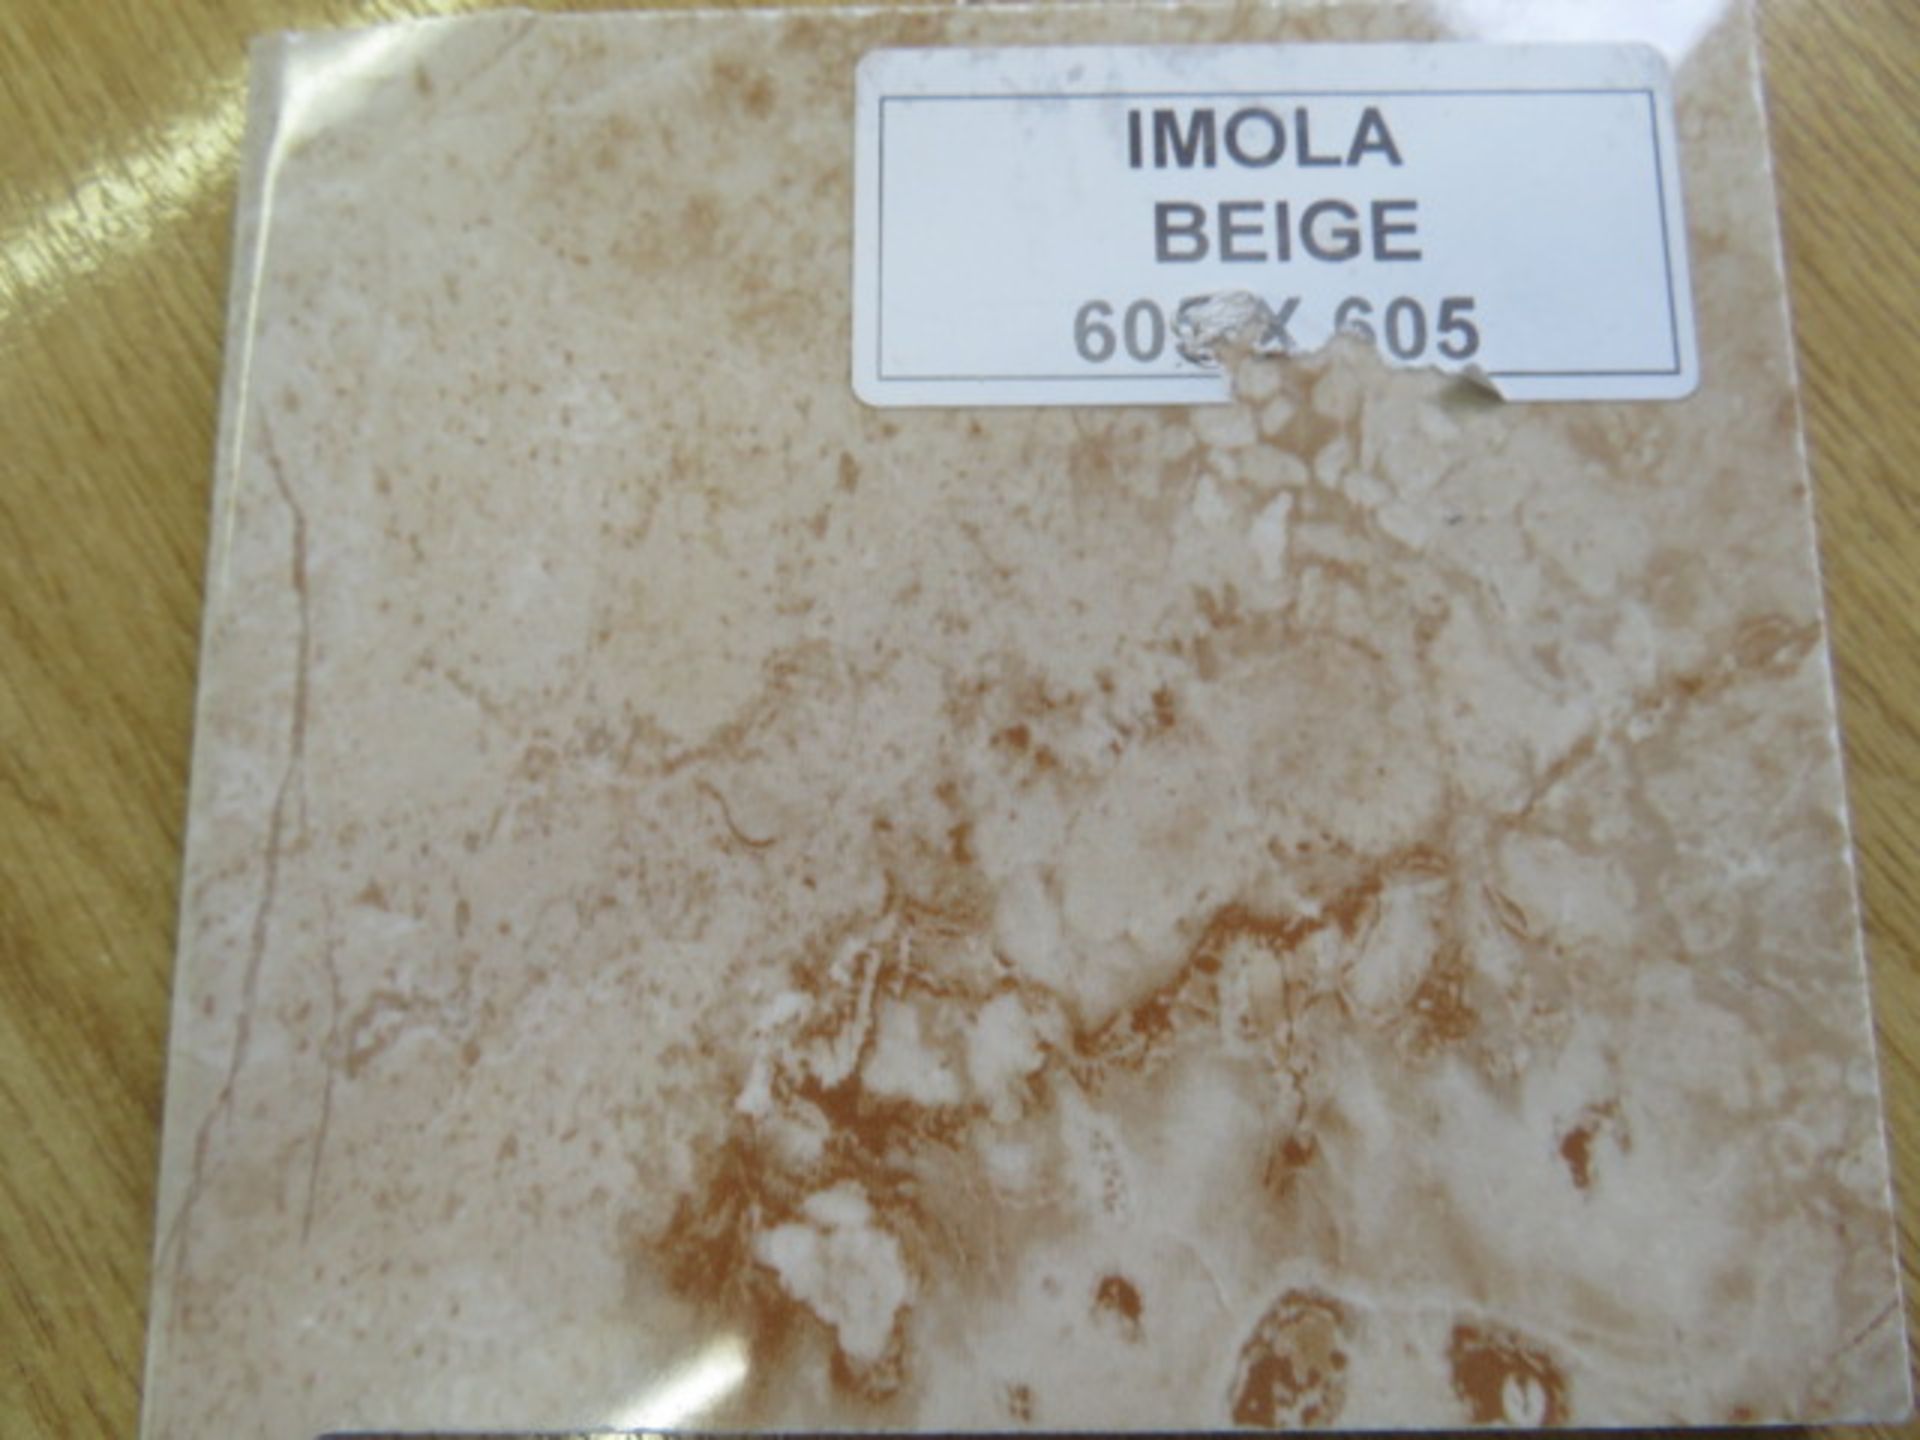 NEW 8.76 Square Meters of Imola Beige Wall and Floor Tiles. 605x605mm per tile, 10mm thick. T... - Image 3 of 3